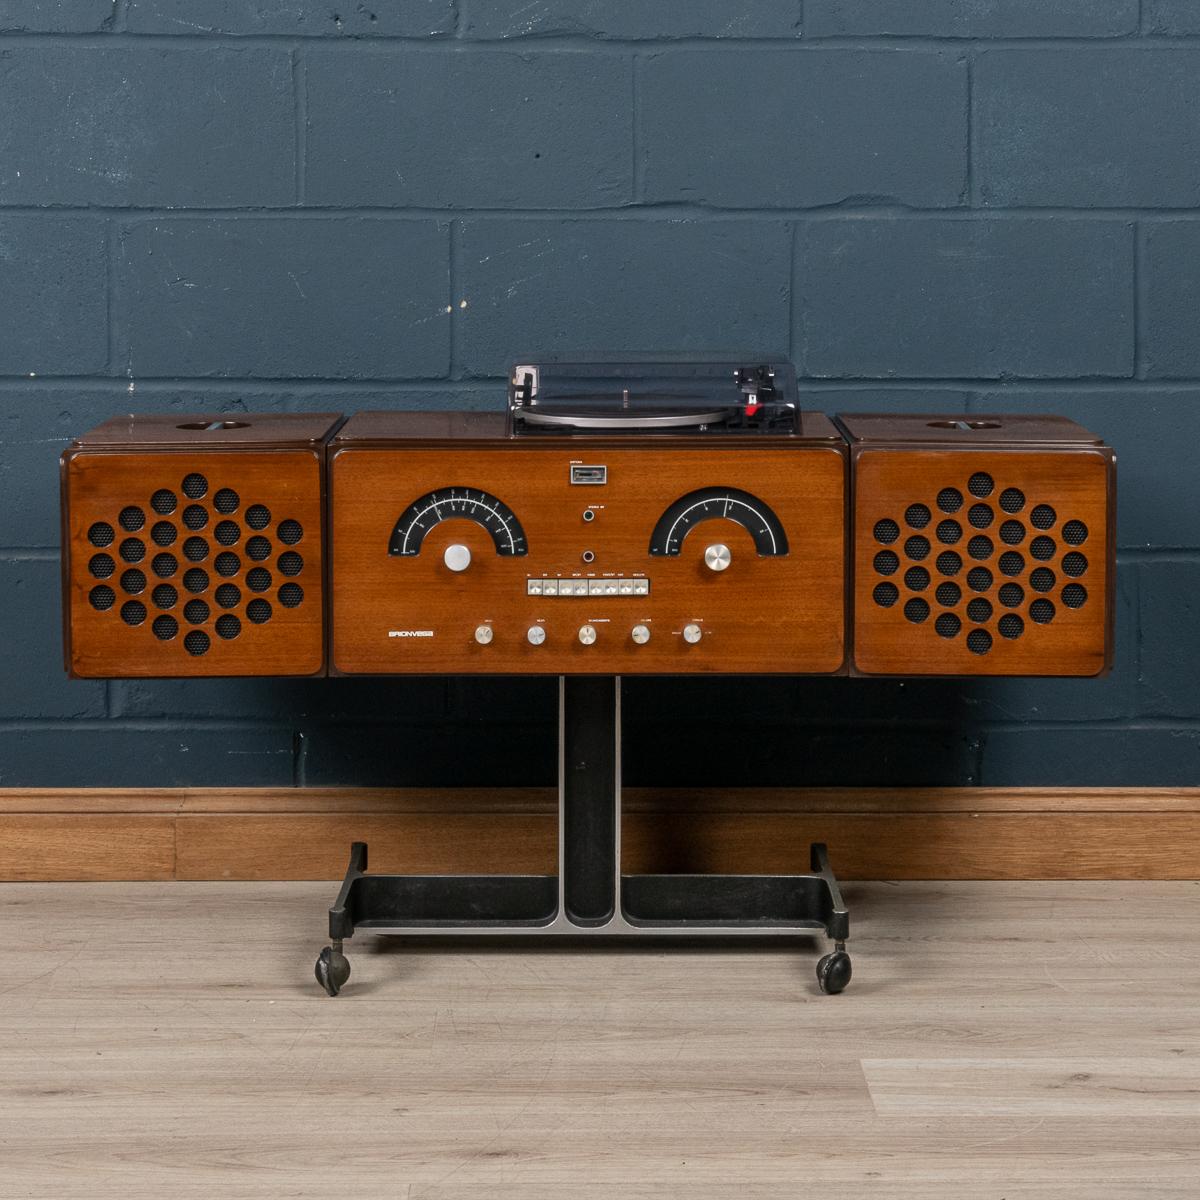 The Brionvega RR-126 is an icon of Pop design. It was conceived as an anthropomorphic ‘musical pet’, with speakers for ears and control dials for its face. It could be moved around easily on its castors, allowing it to operate in concert with other